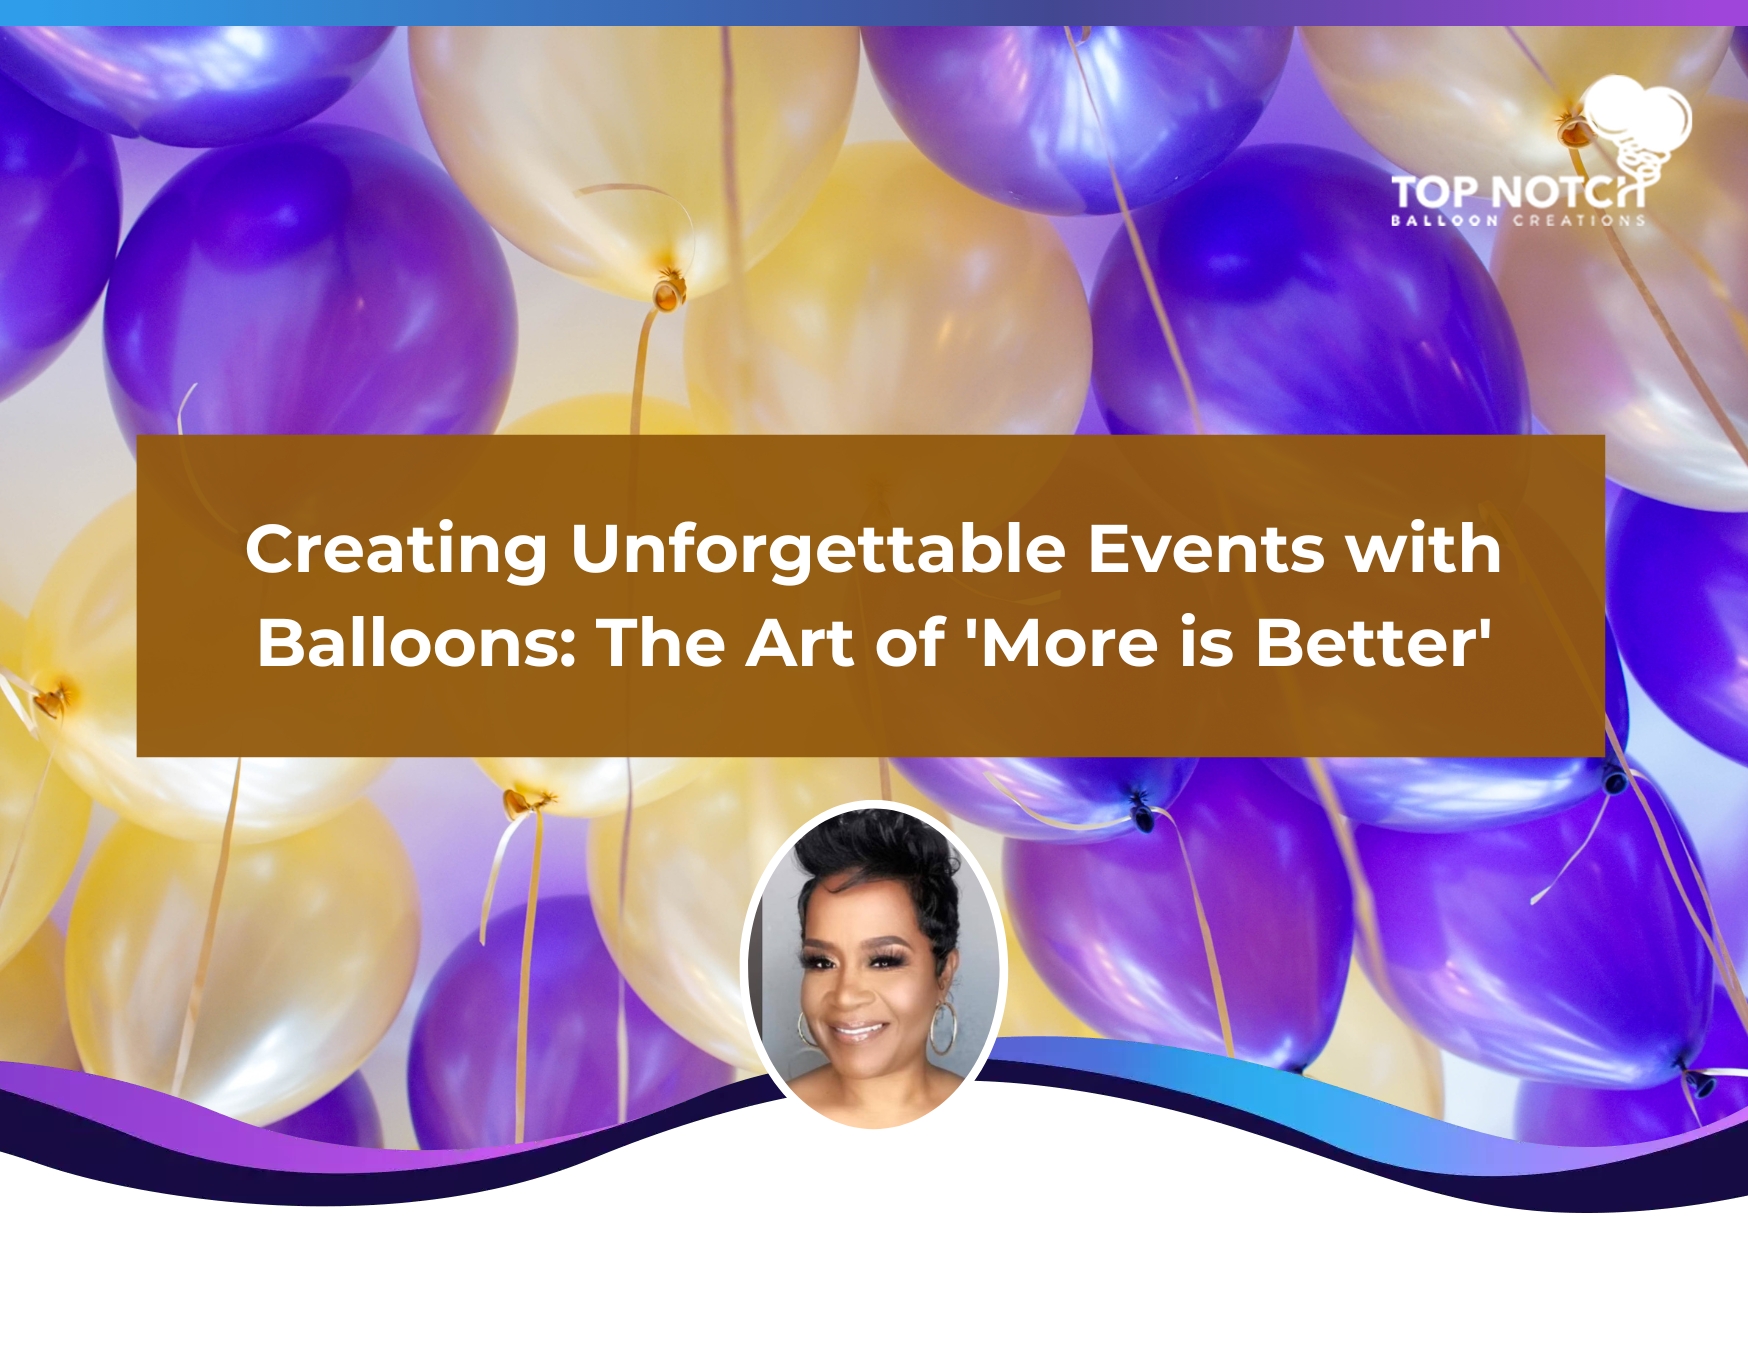 Creating Unforgettable Events with Balloons: The Art of 'More is Better'